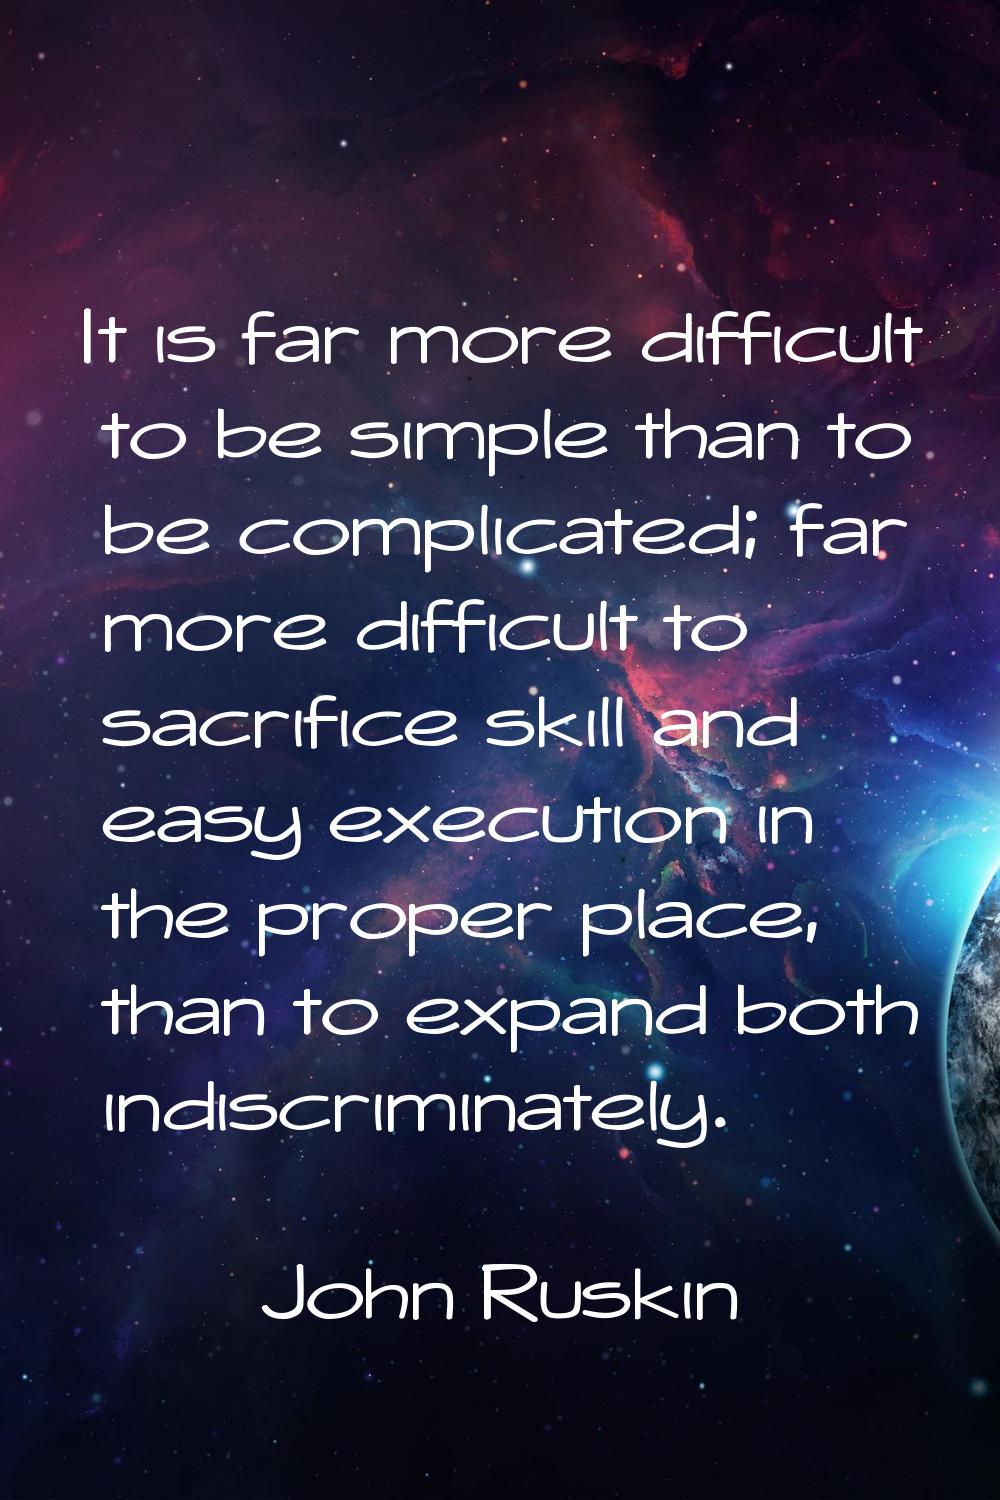 It is far more difficult to be simple than to be complicated; far more difficult to sacrifice skill